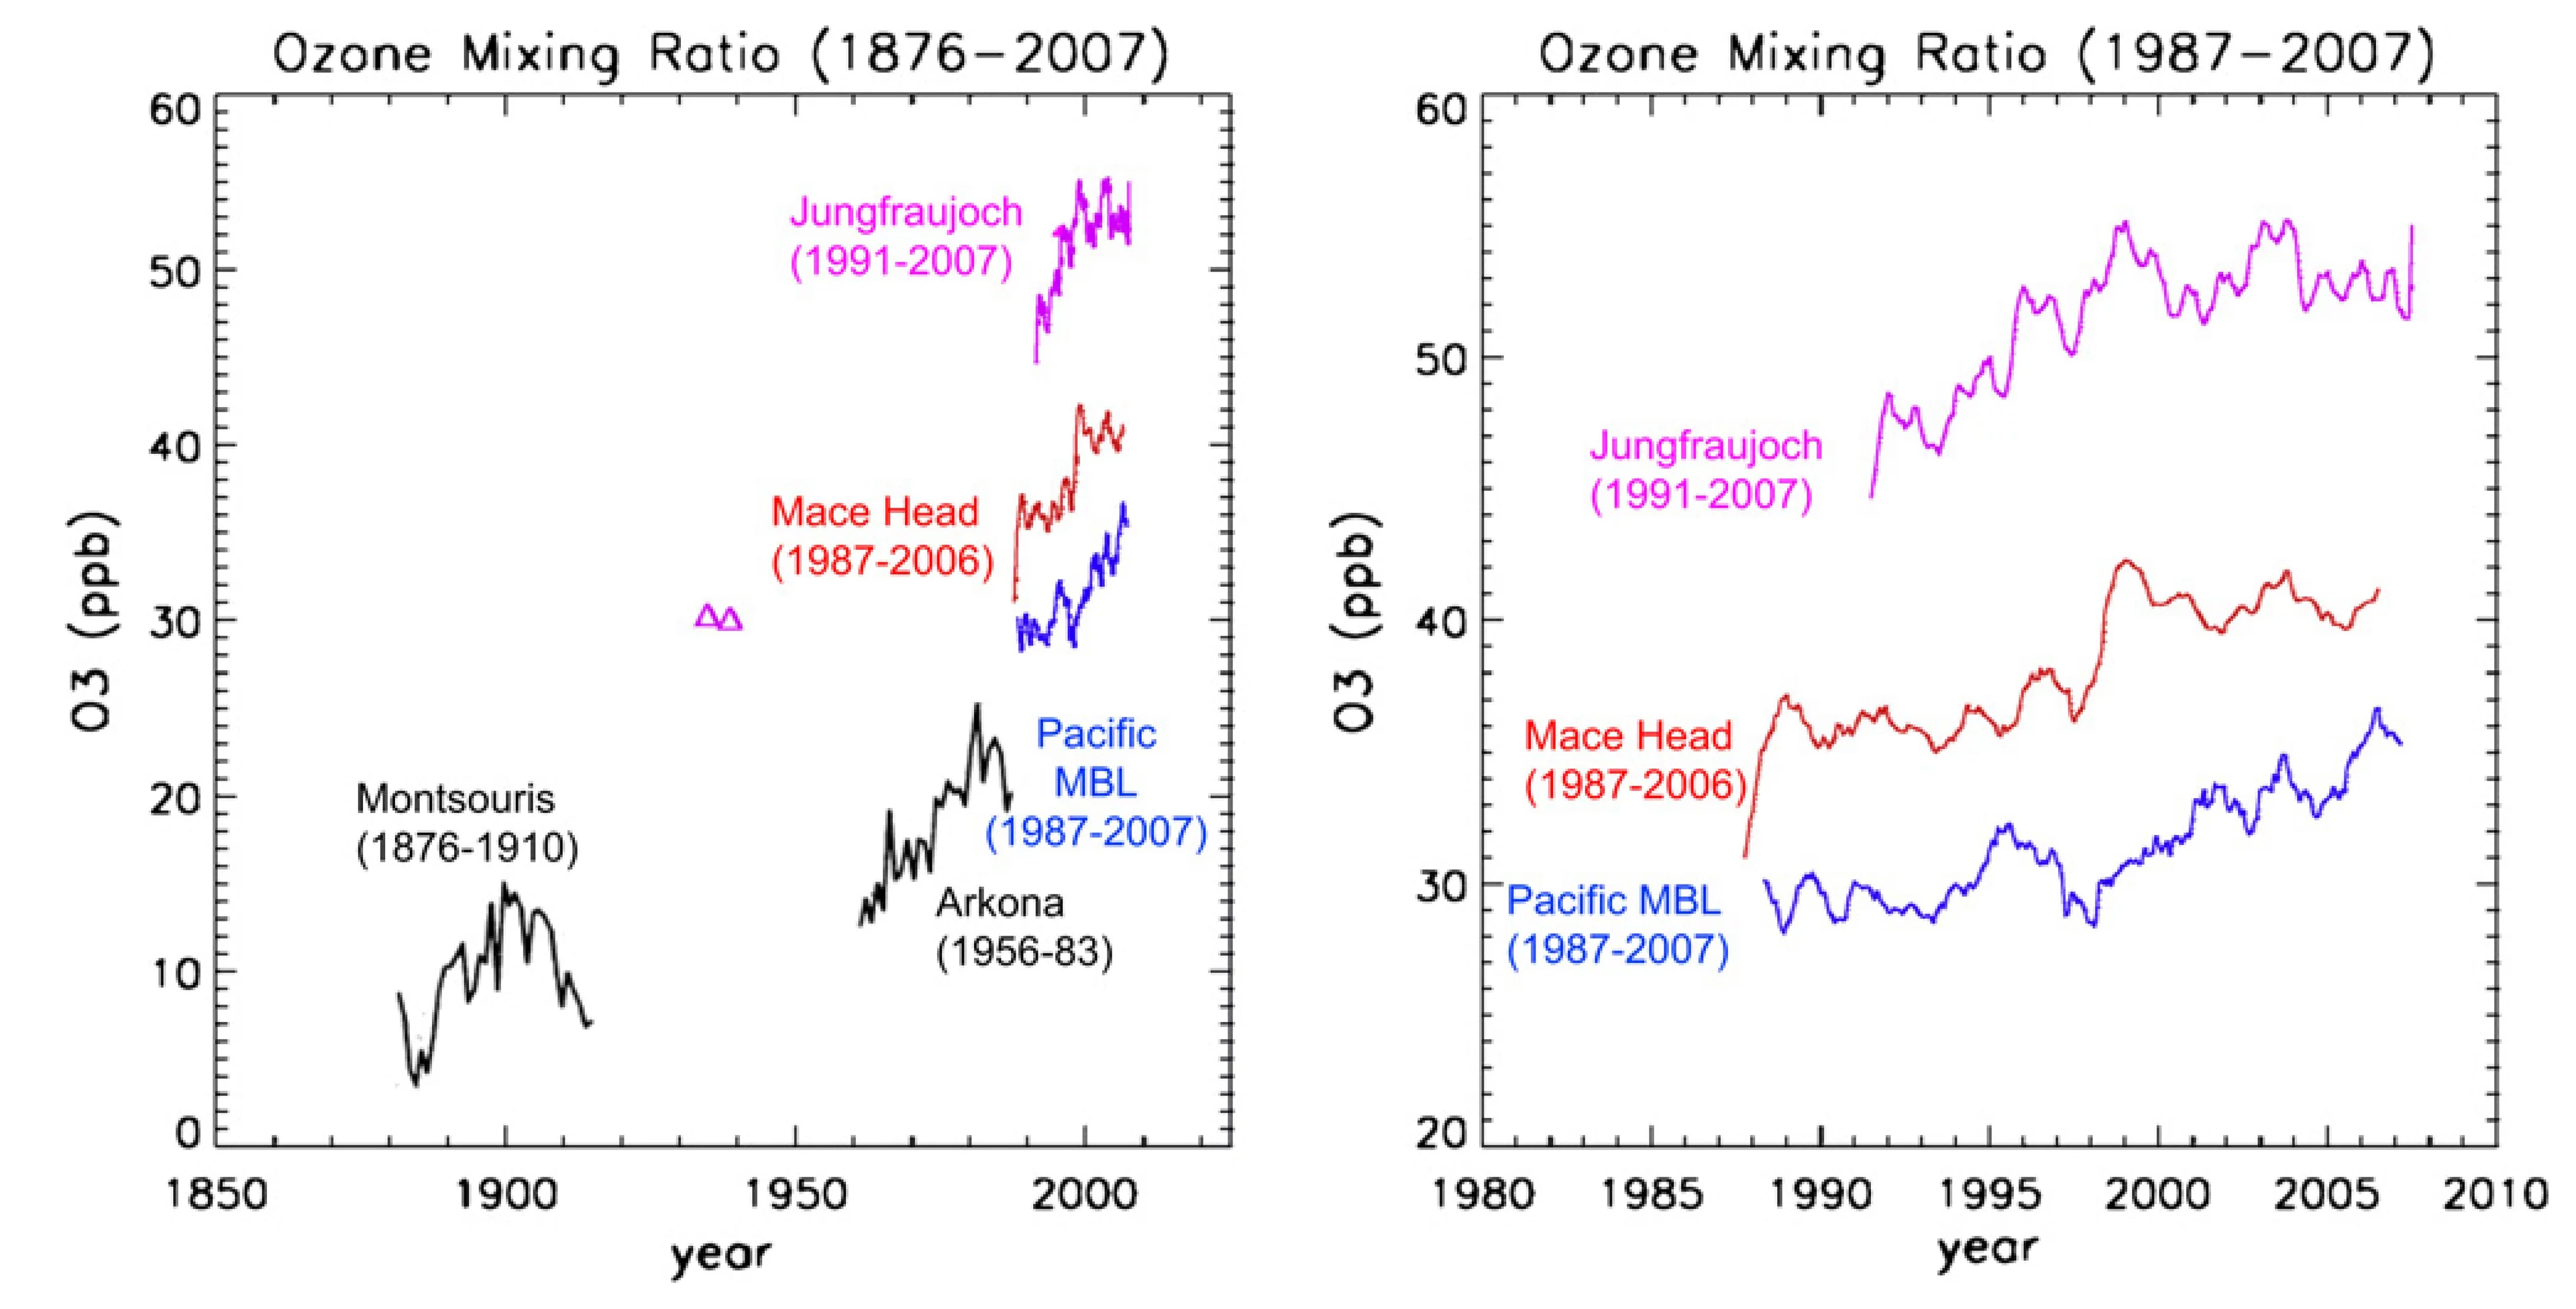 Longterm trends of ozone